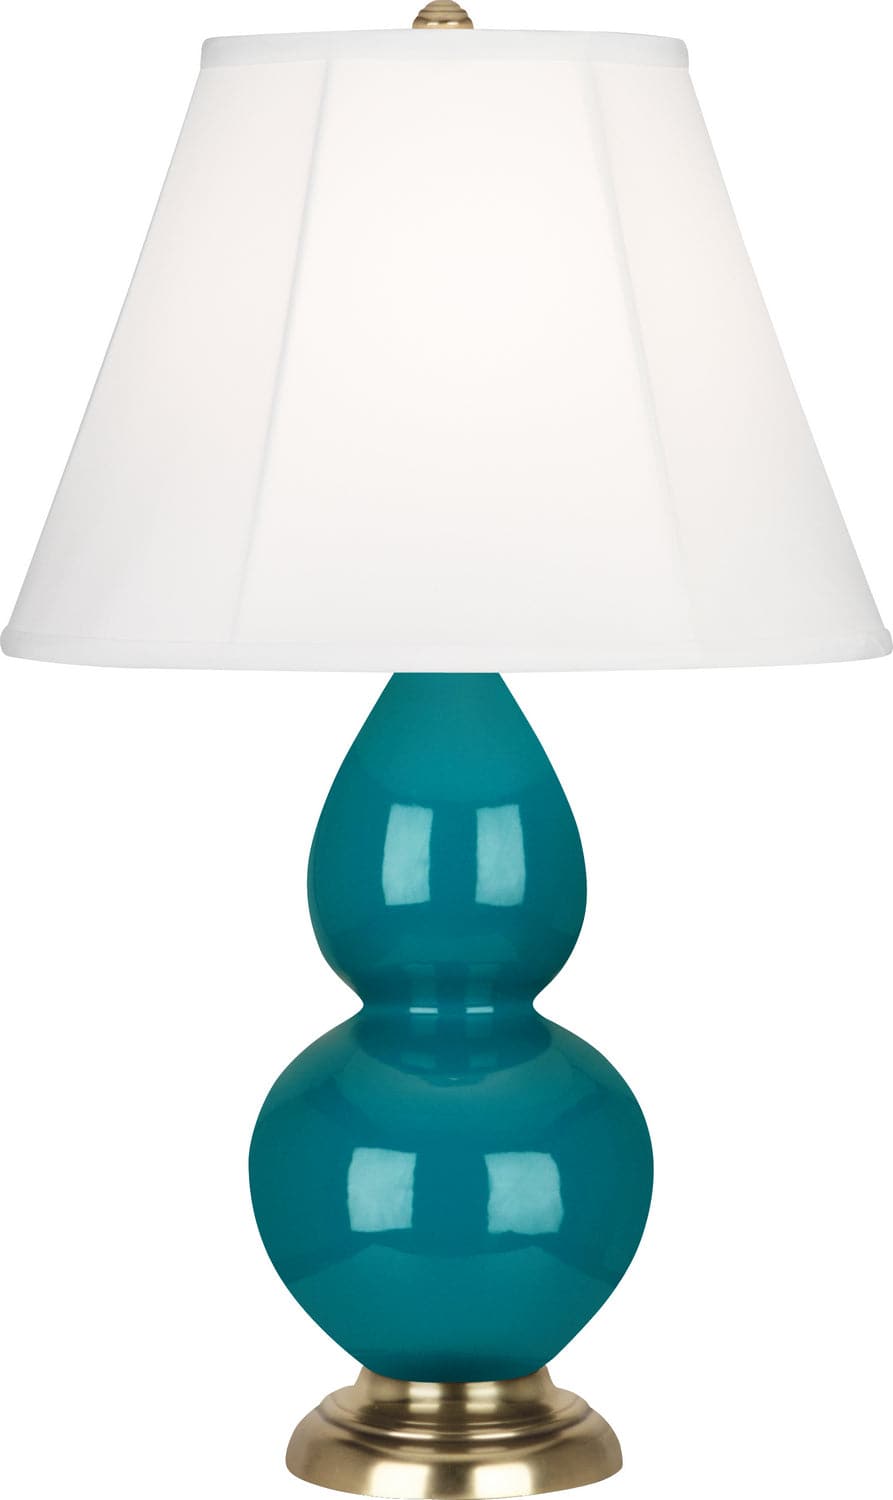 Robert Abbey - 1771 - One Light Accent Lamp - Small Double Gourd - Peacock Glazed